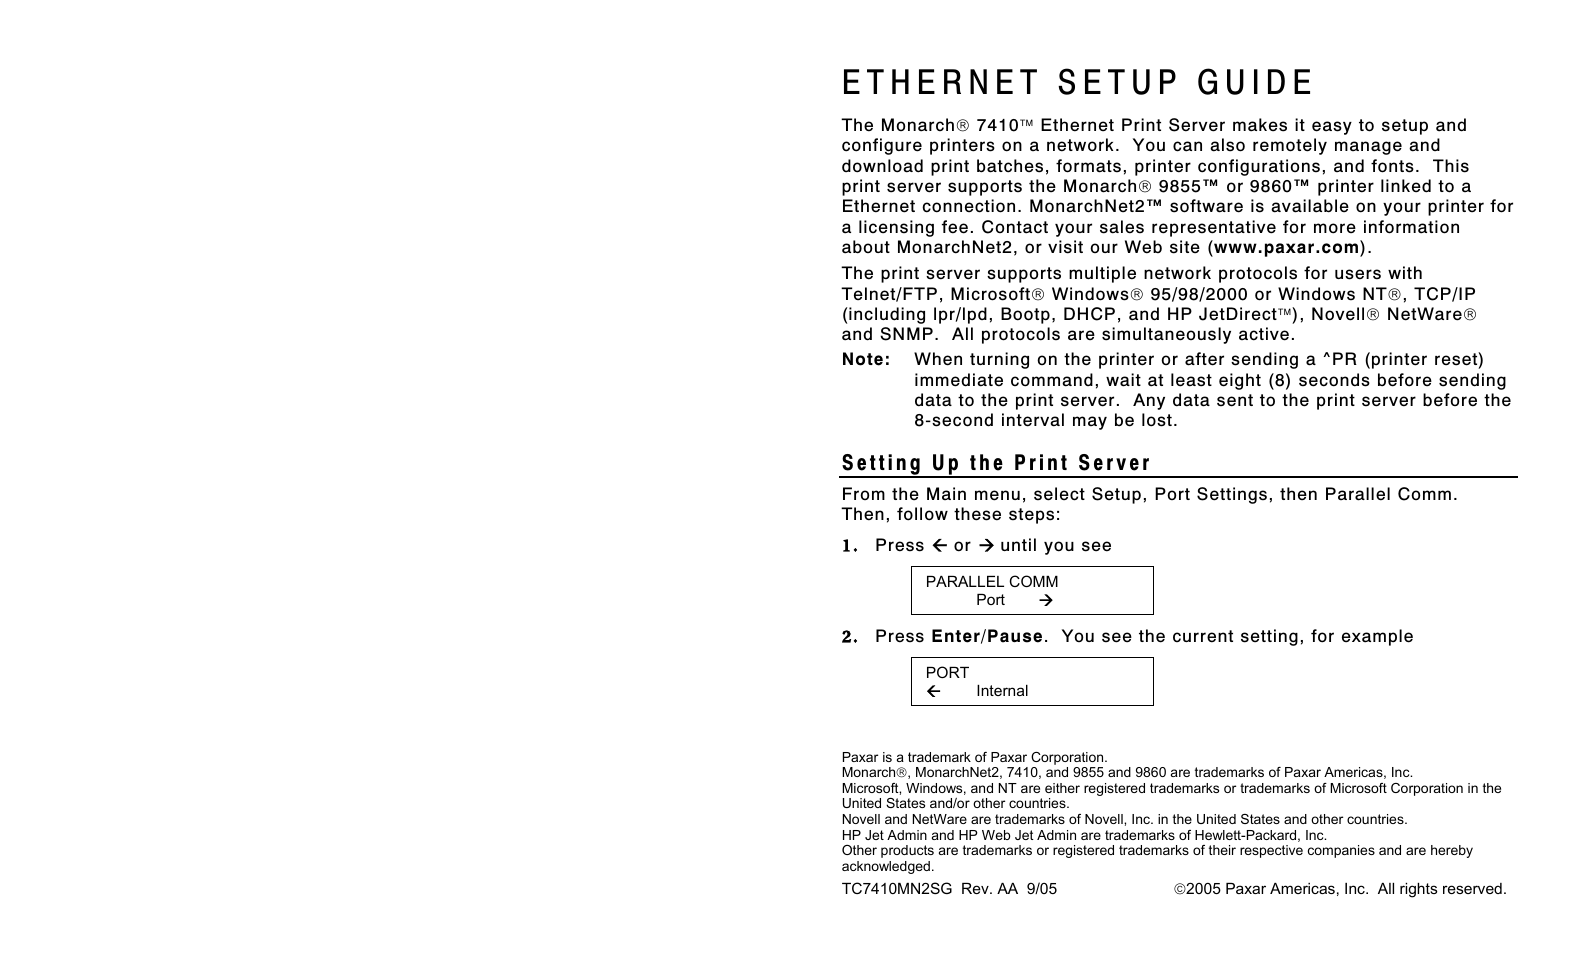 7410 Ethernet for 9825 Printers